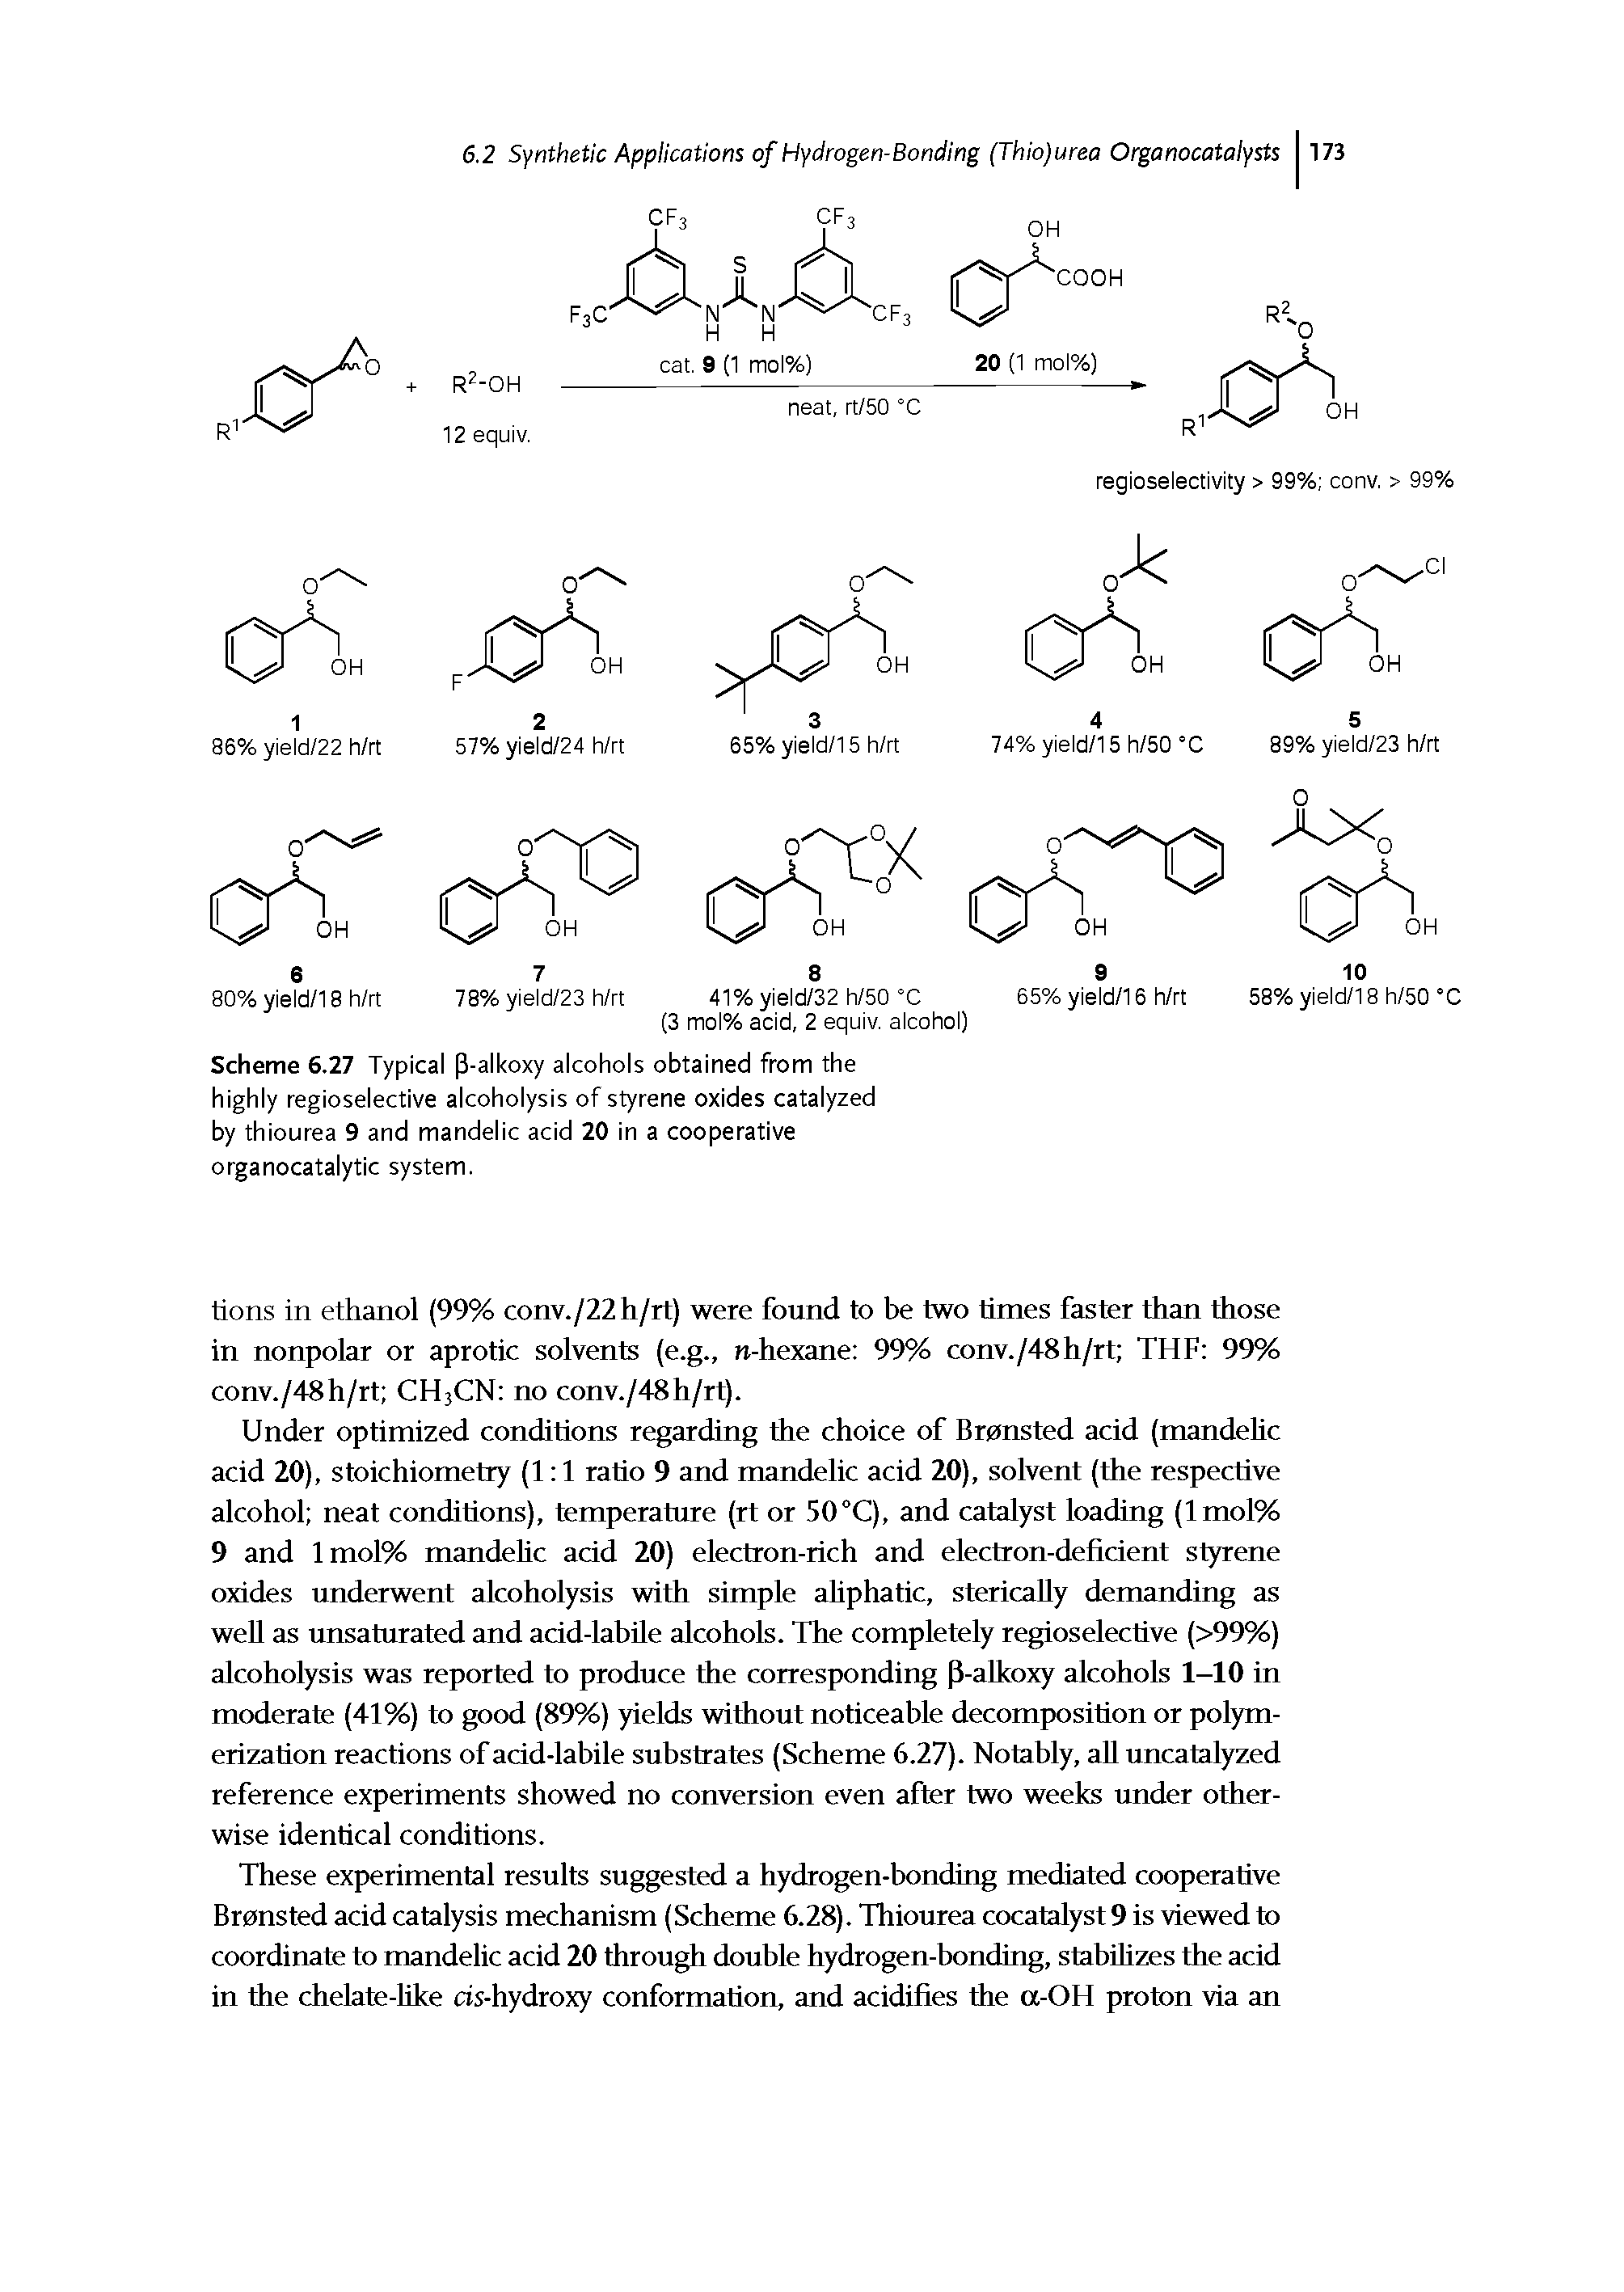 Scheme 6.27 Typical P-alkoxy alcohols obtained from the highly regioselective alcoholysis of styrene oxides catalyzed by thiourea 9 and mandelic acid 20 in a cooperative organocatalytic system.